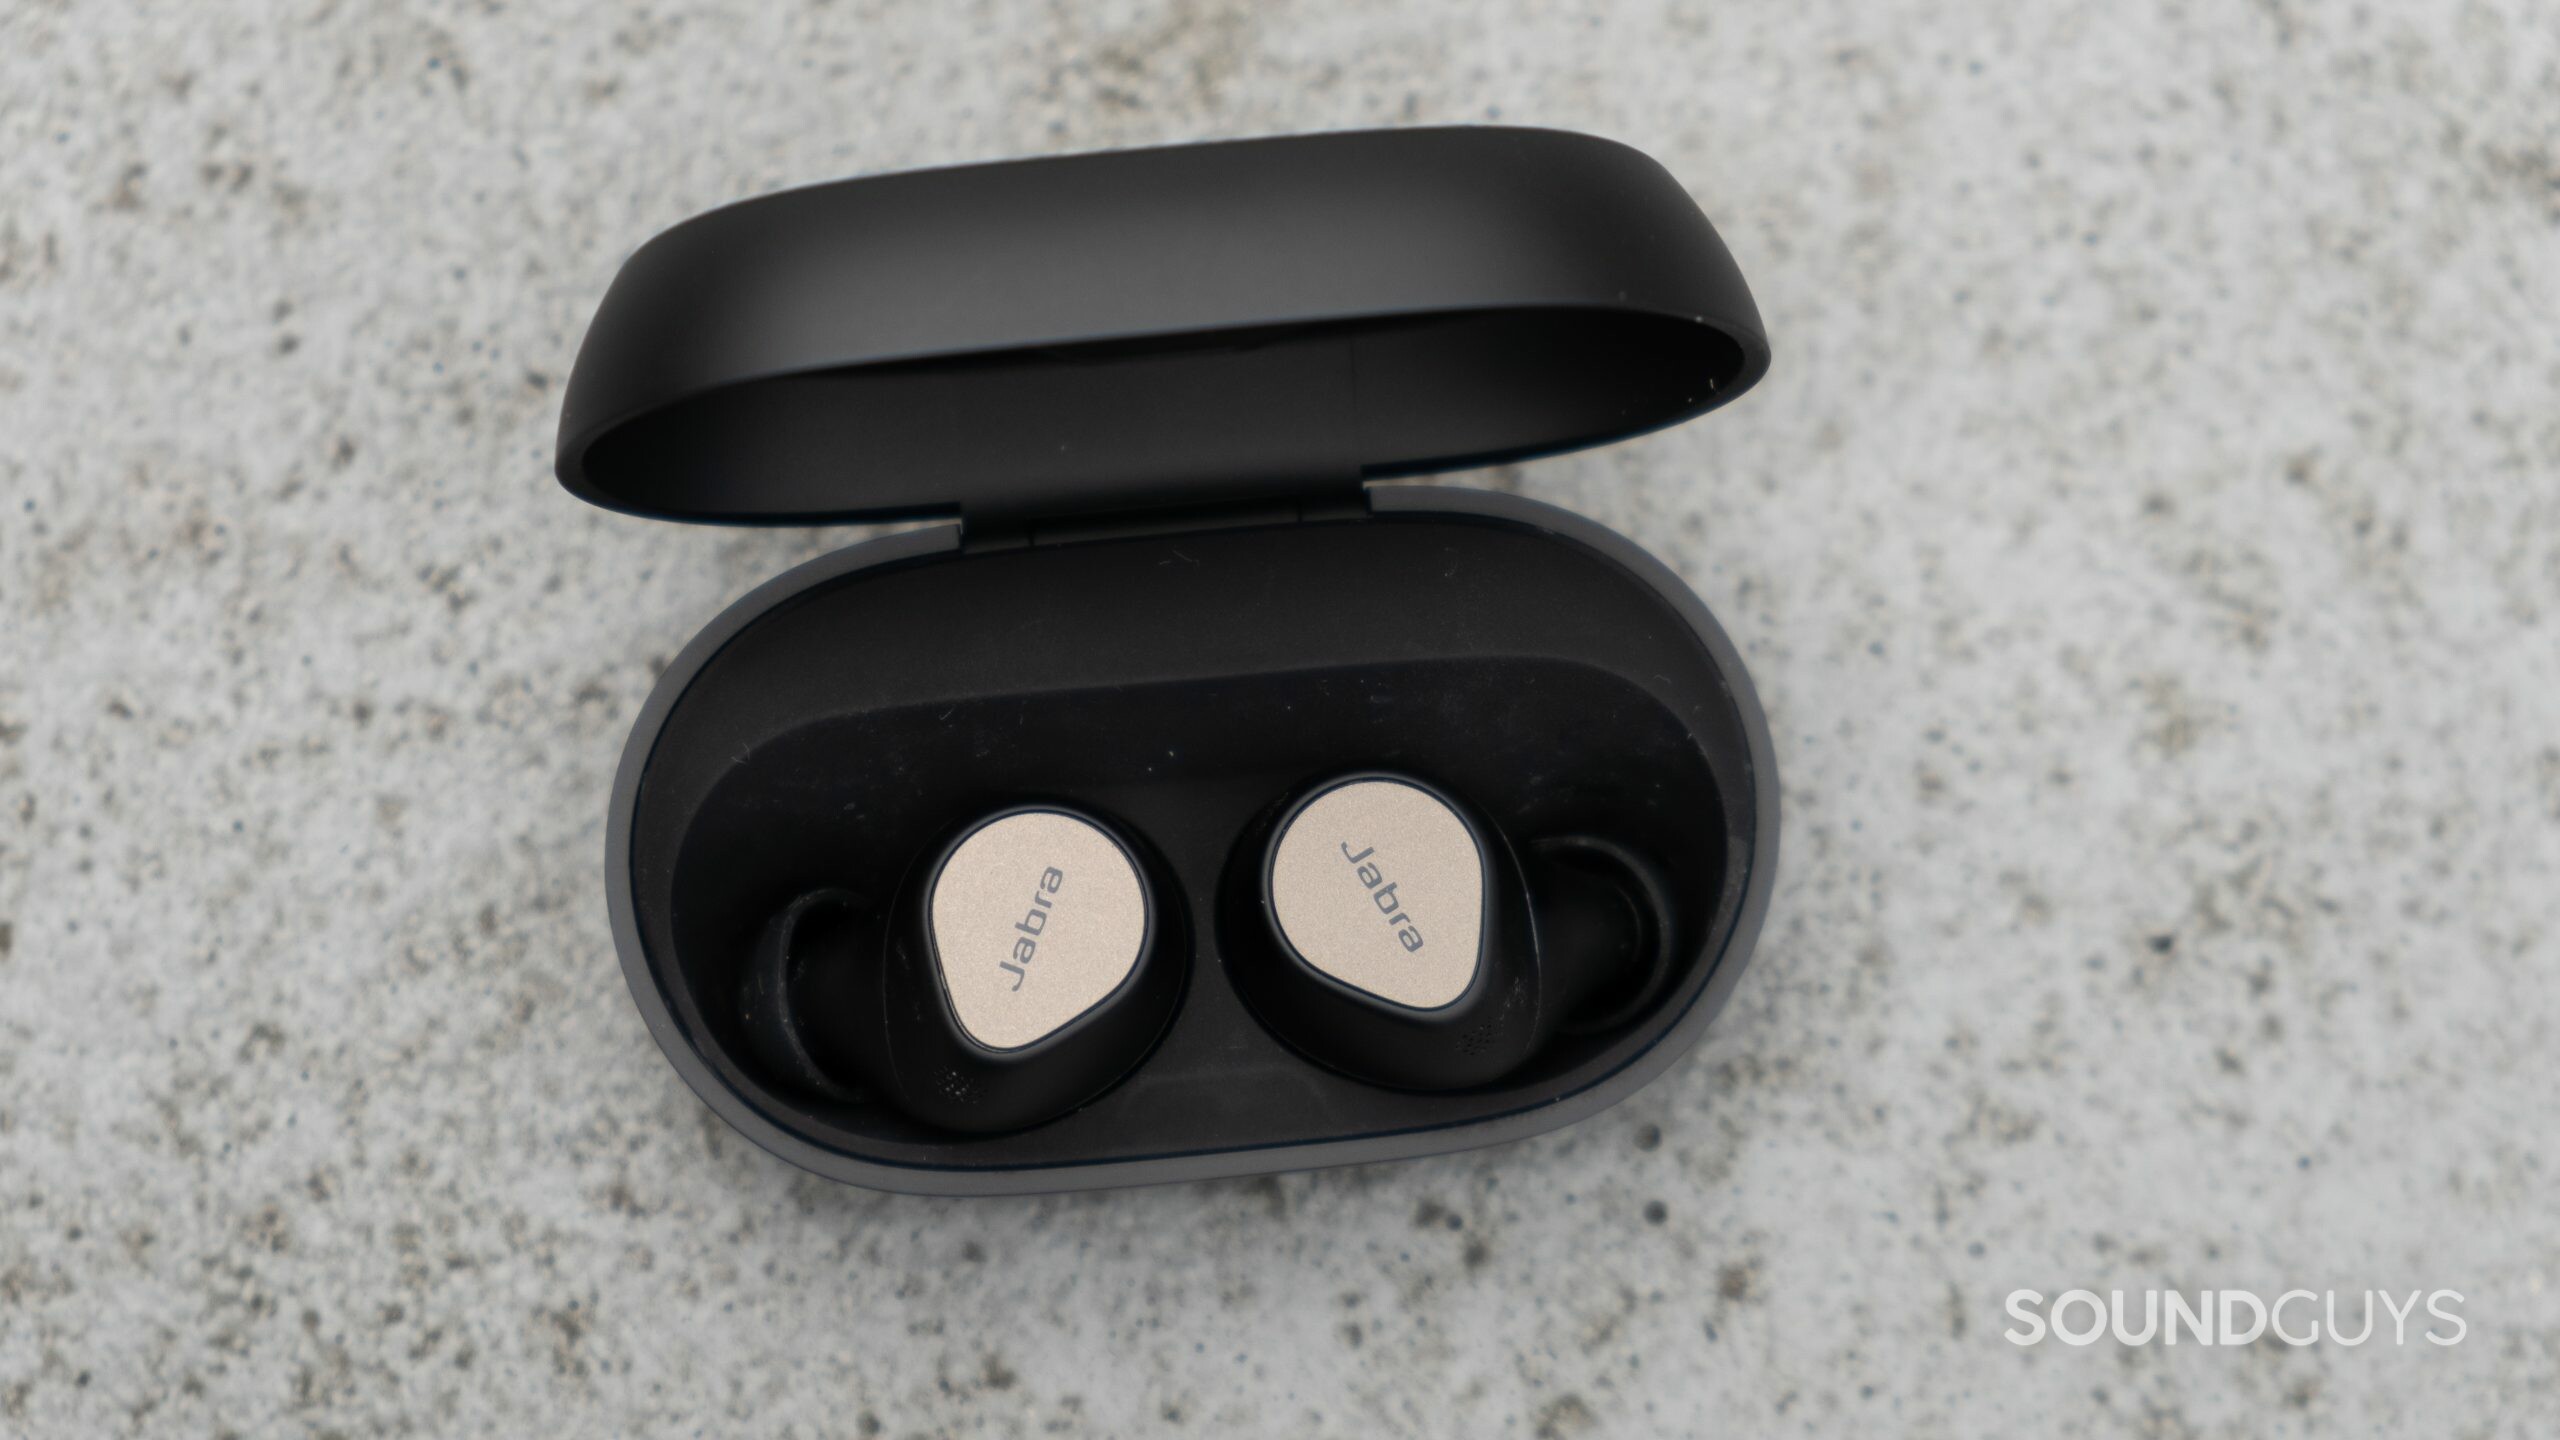 True wireless earbuds with fully adjustable ANC